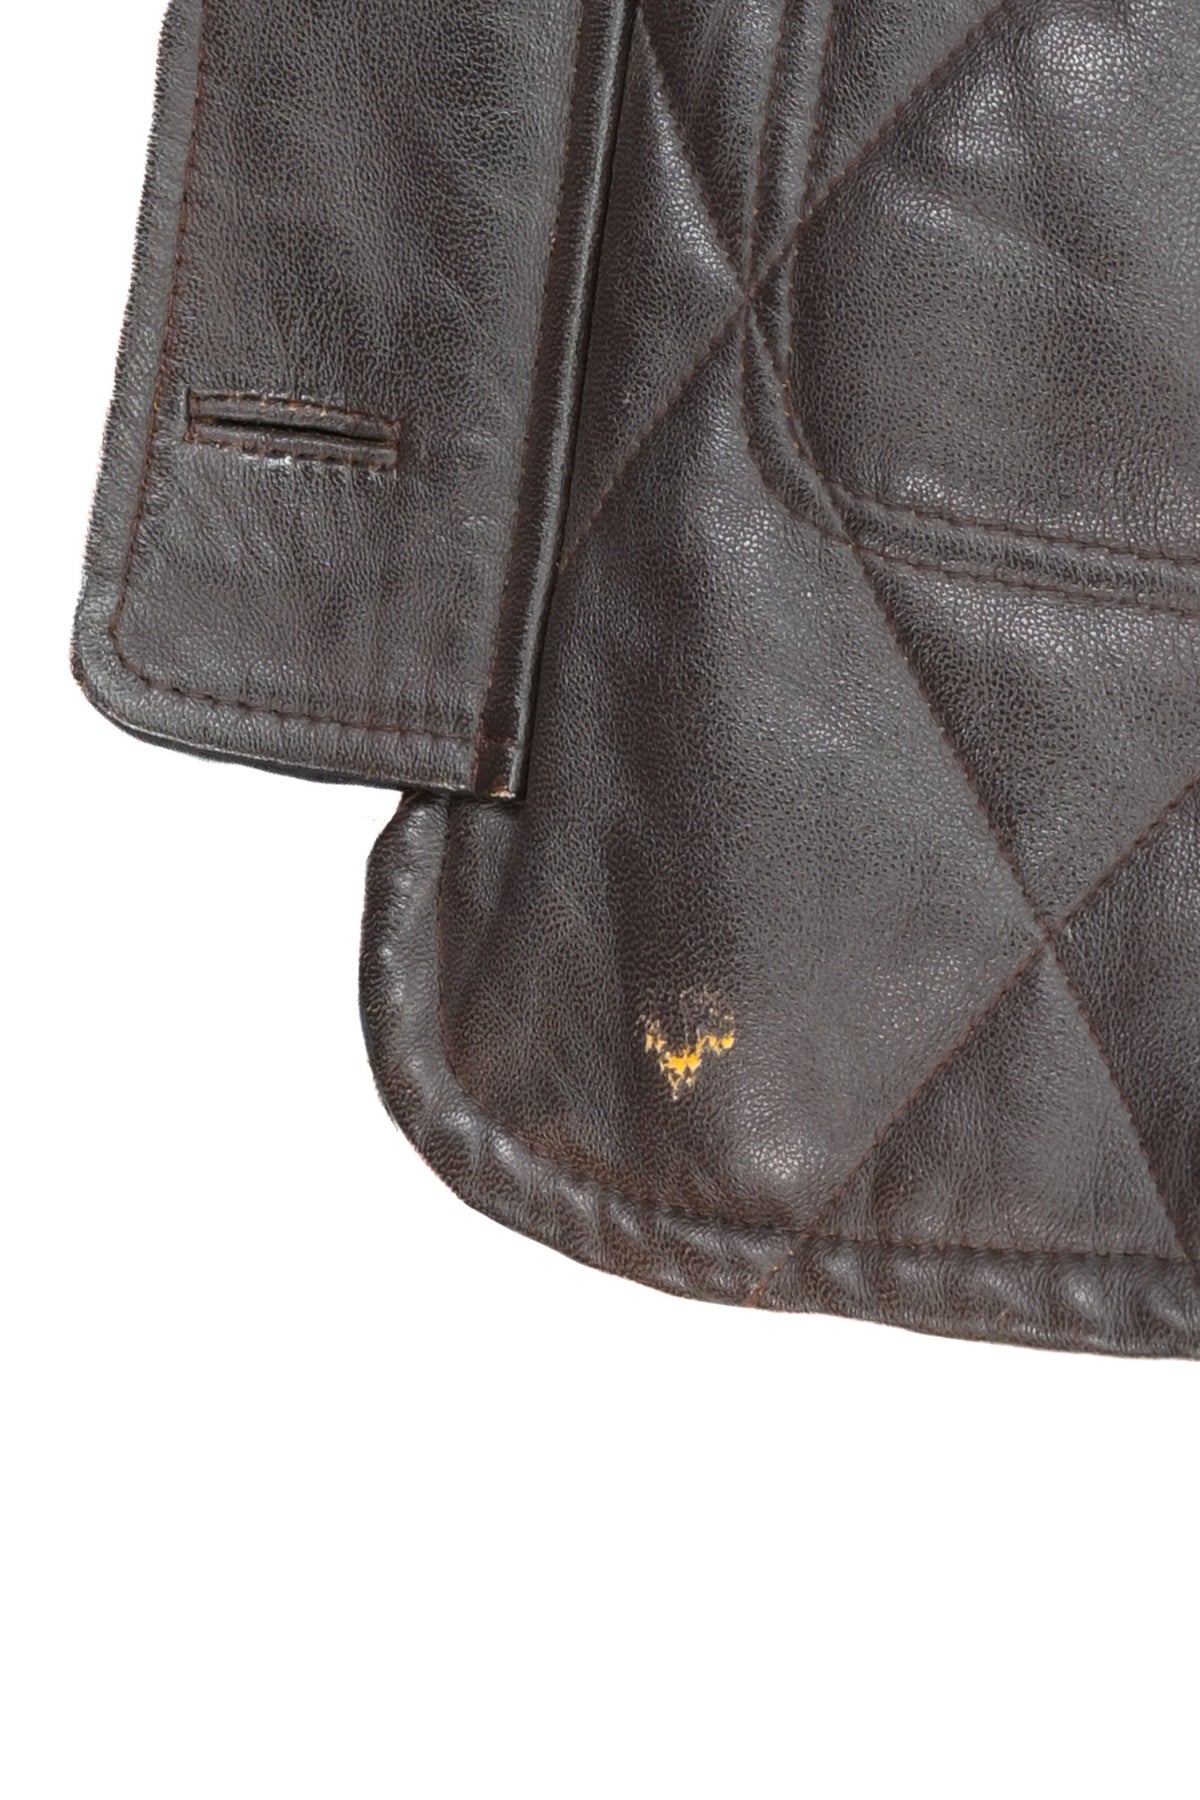 Mauritius Damaged Quilted Leather Jacket